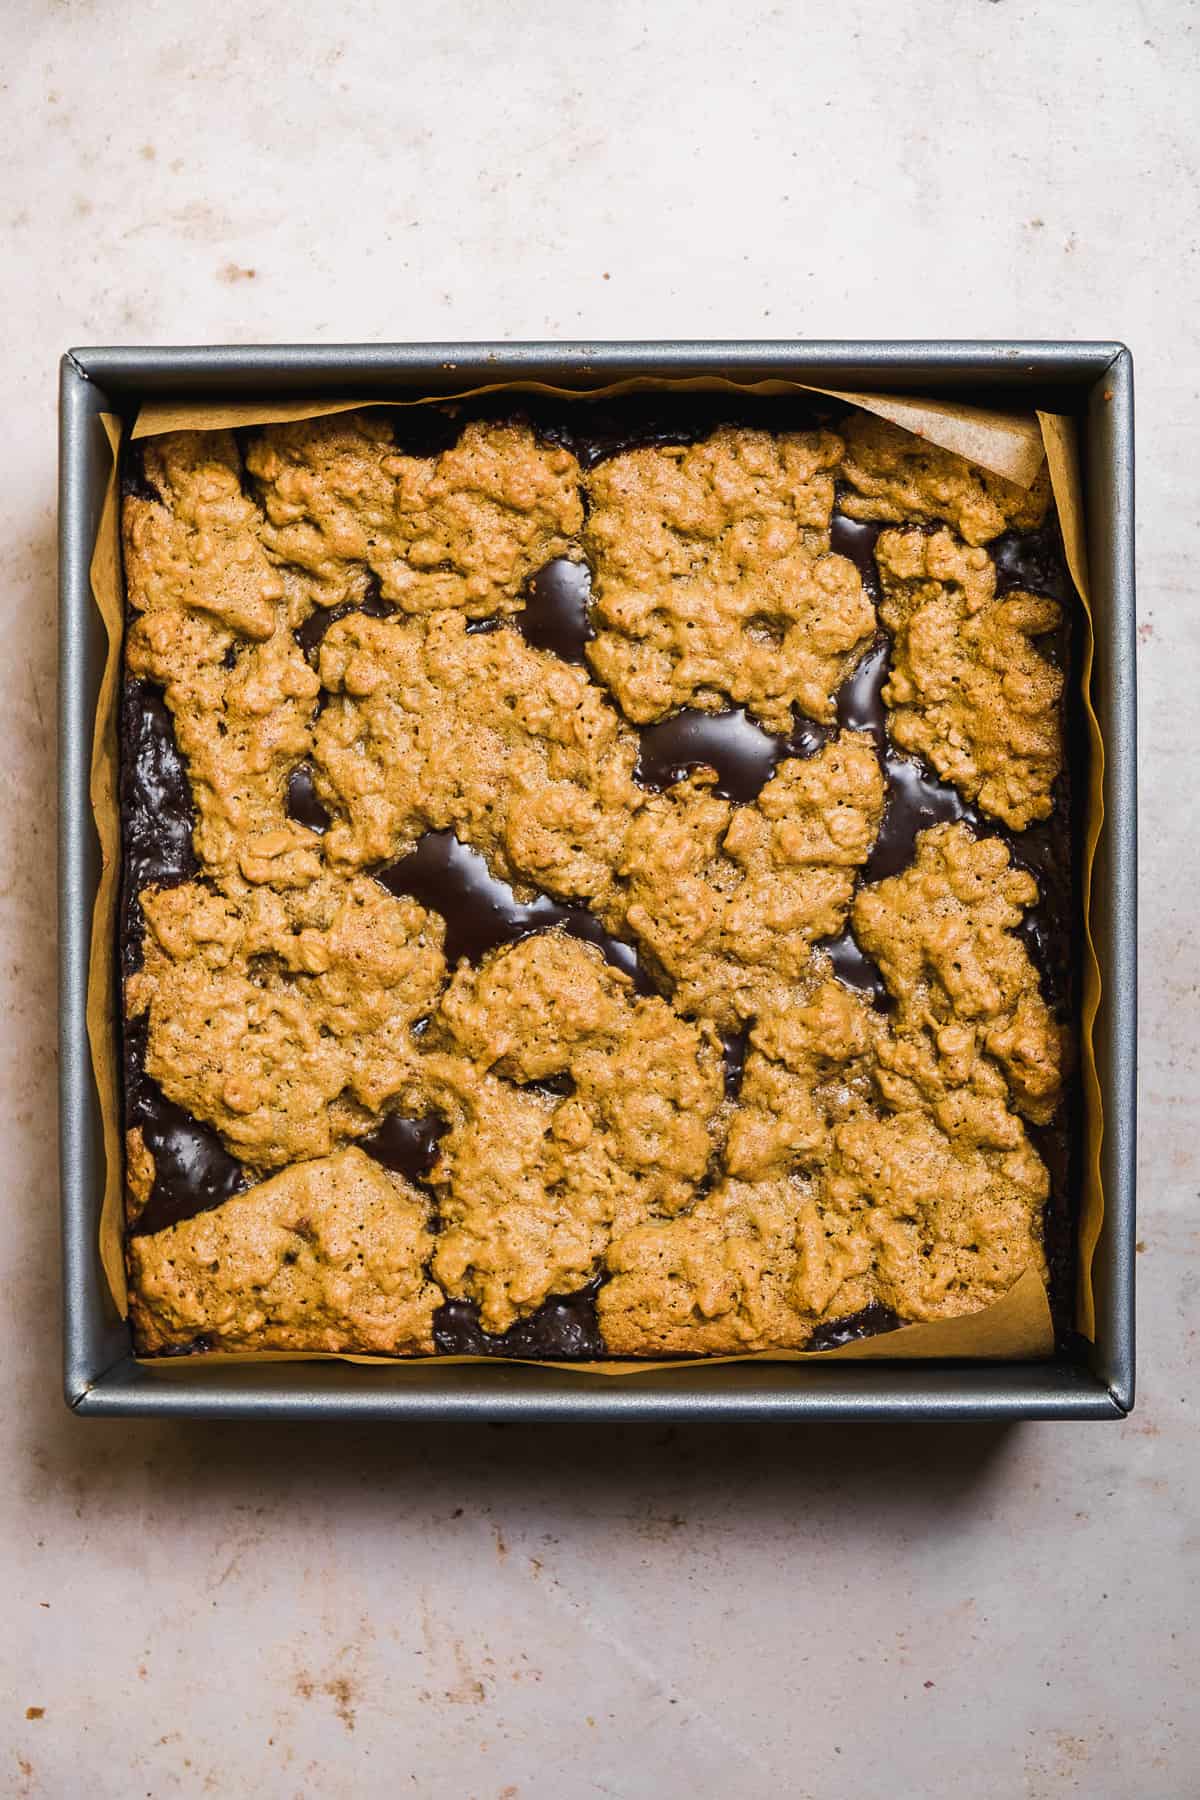 Oatmeal fudge bars baked in a square pan.